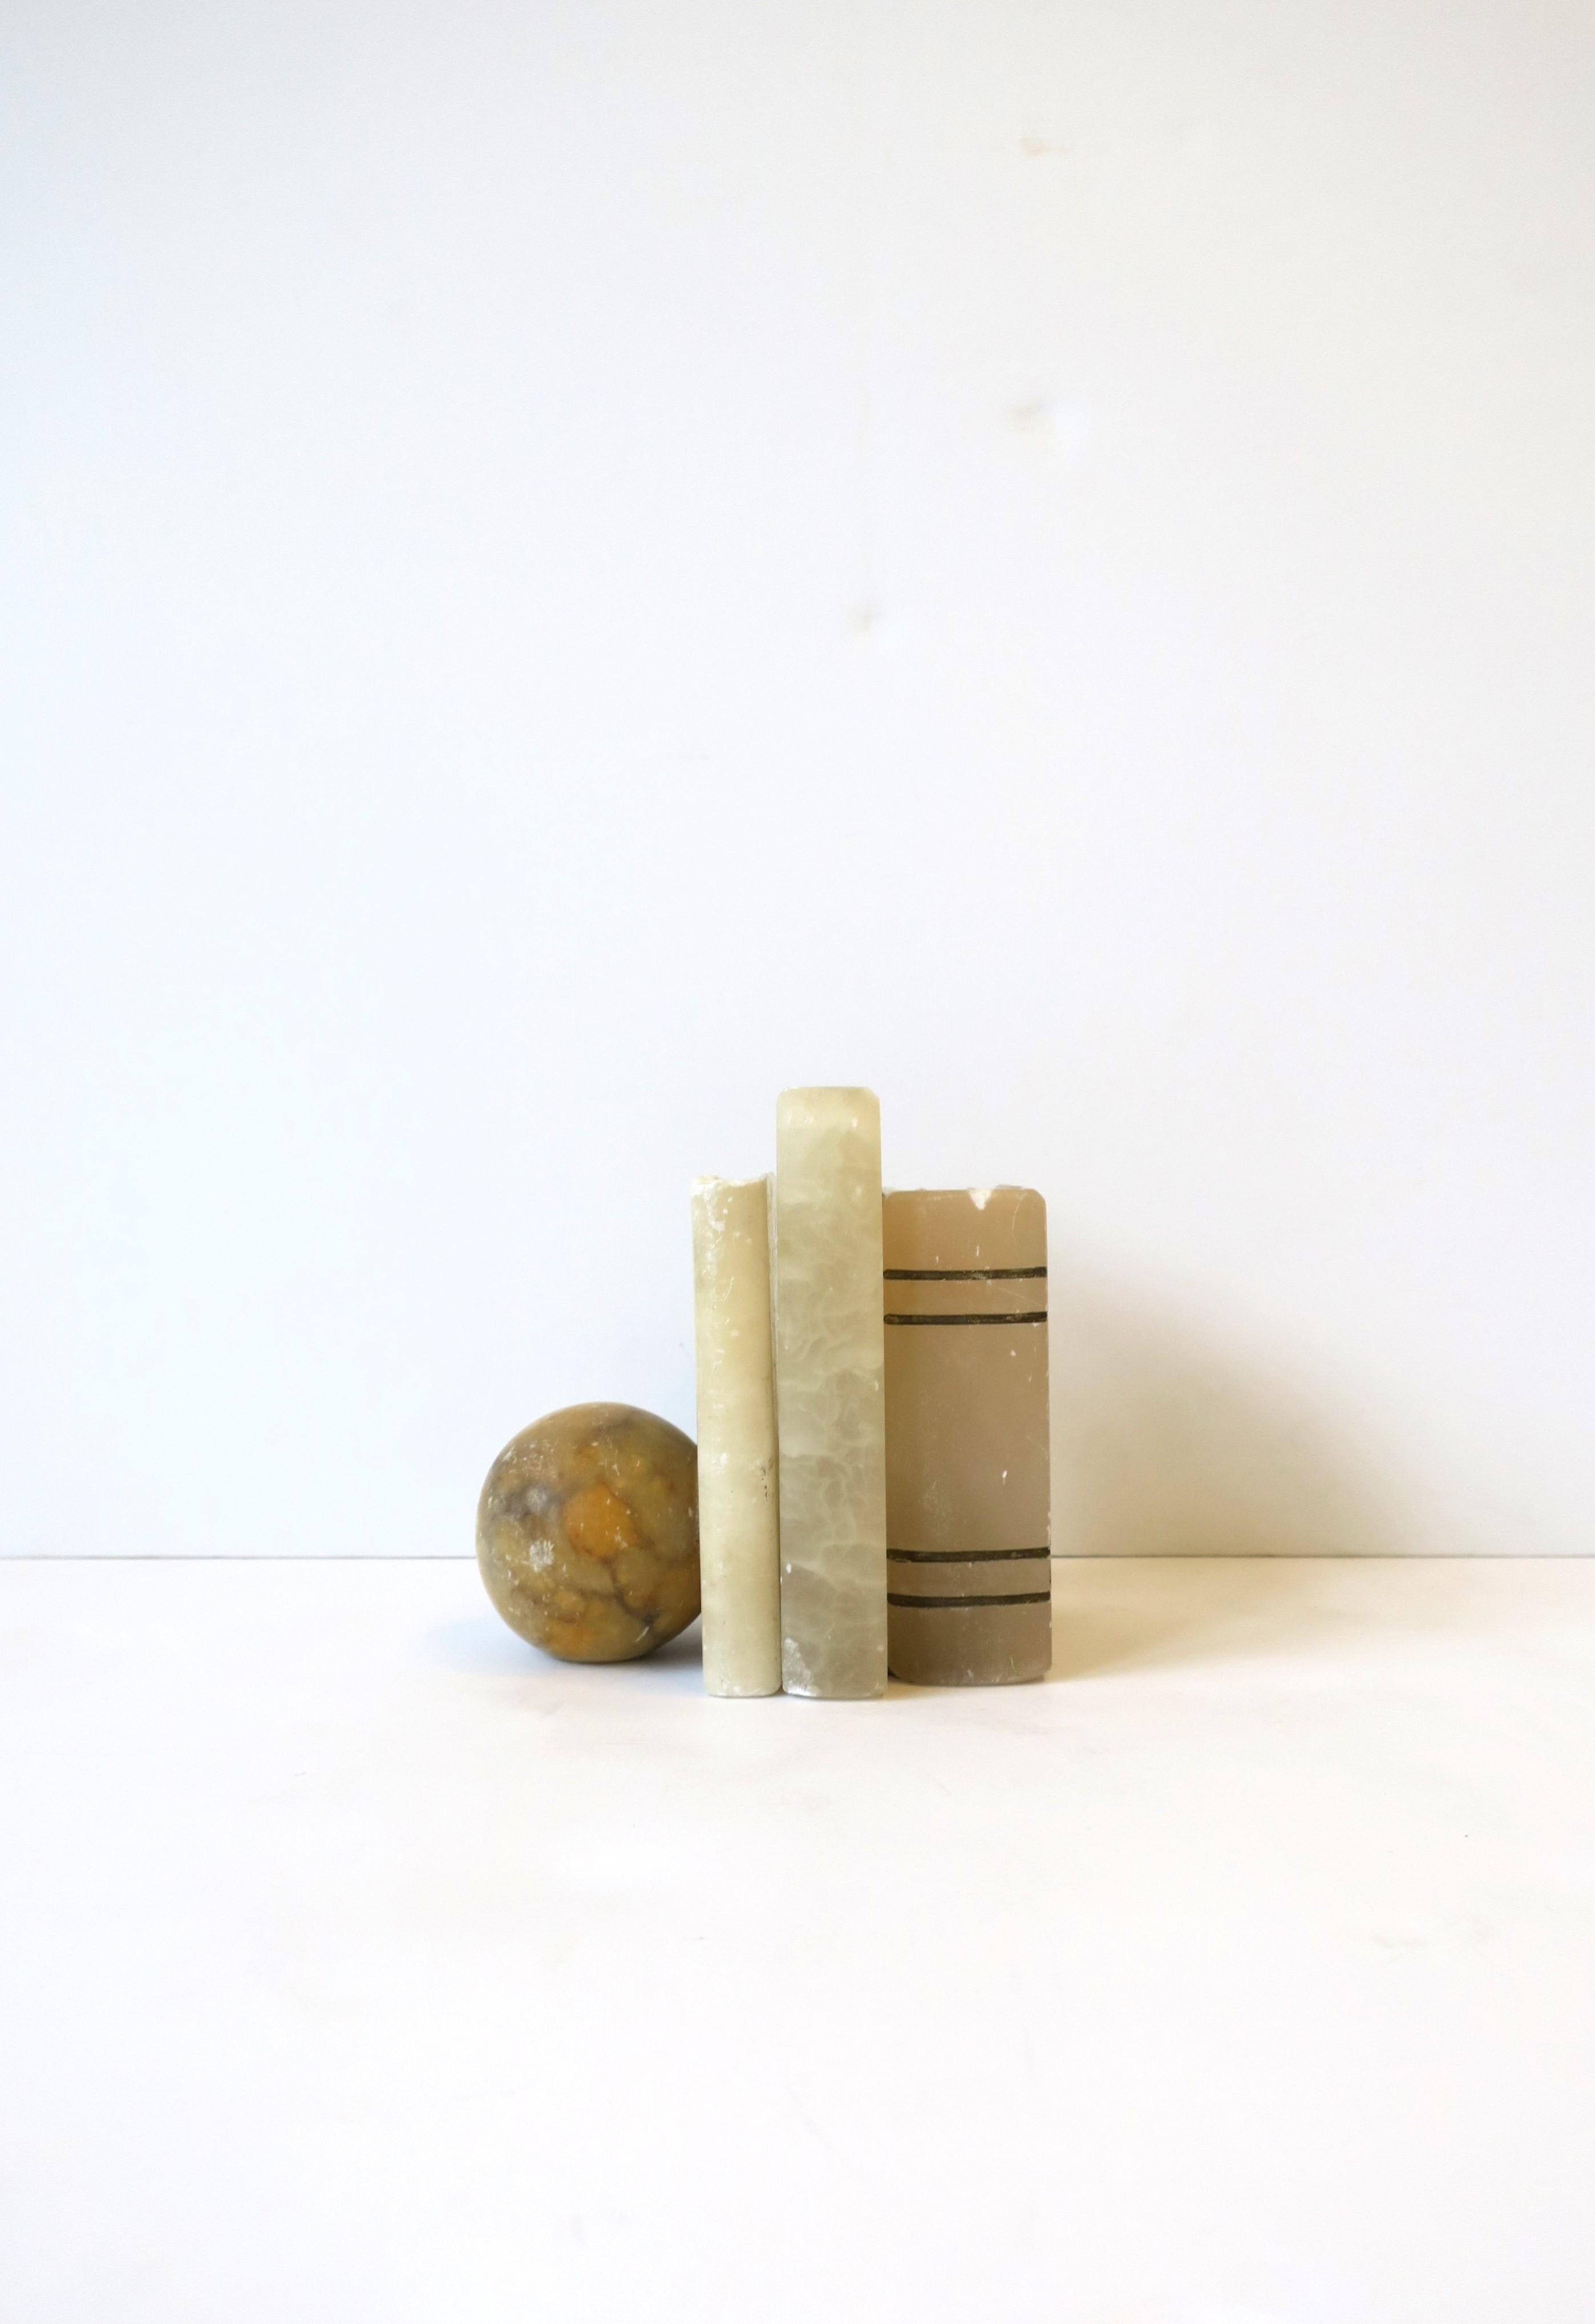 A small and substantial pair of Art Deco Modern Italian marble 'book' bookends, circa early-20th century, Italy. 

Dimension: 3.5